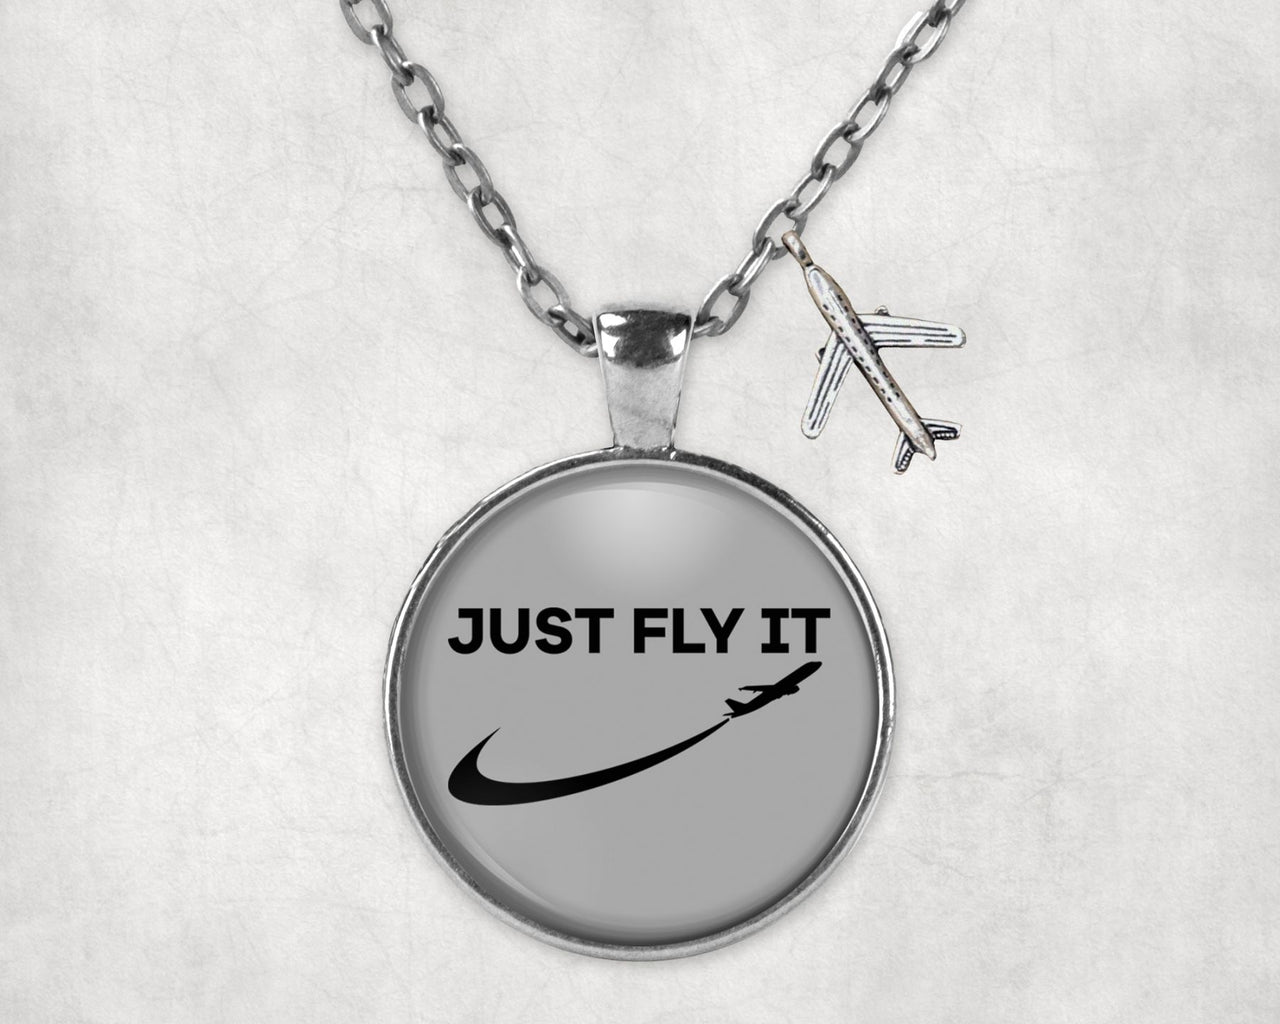 Just Fly It 2 Designed Necklaces